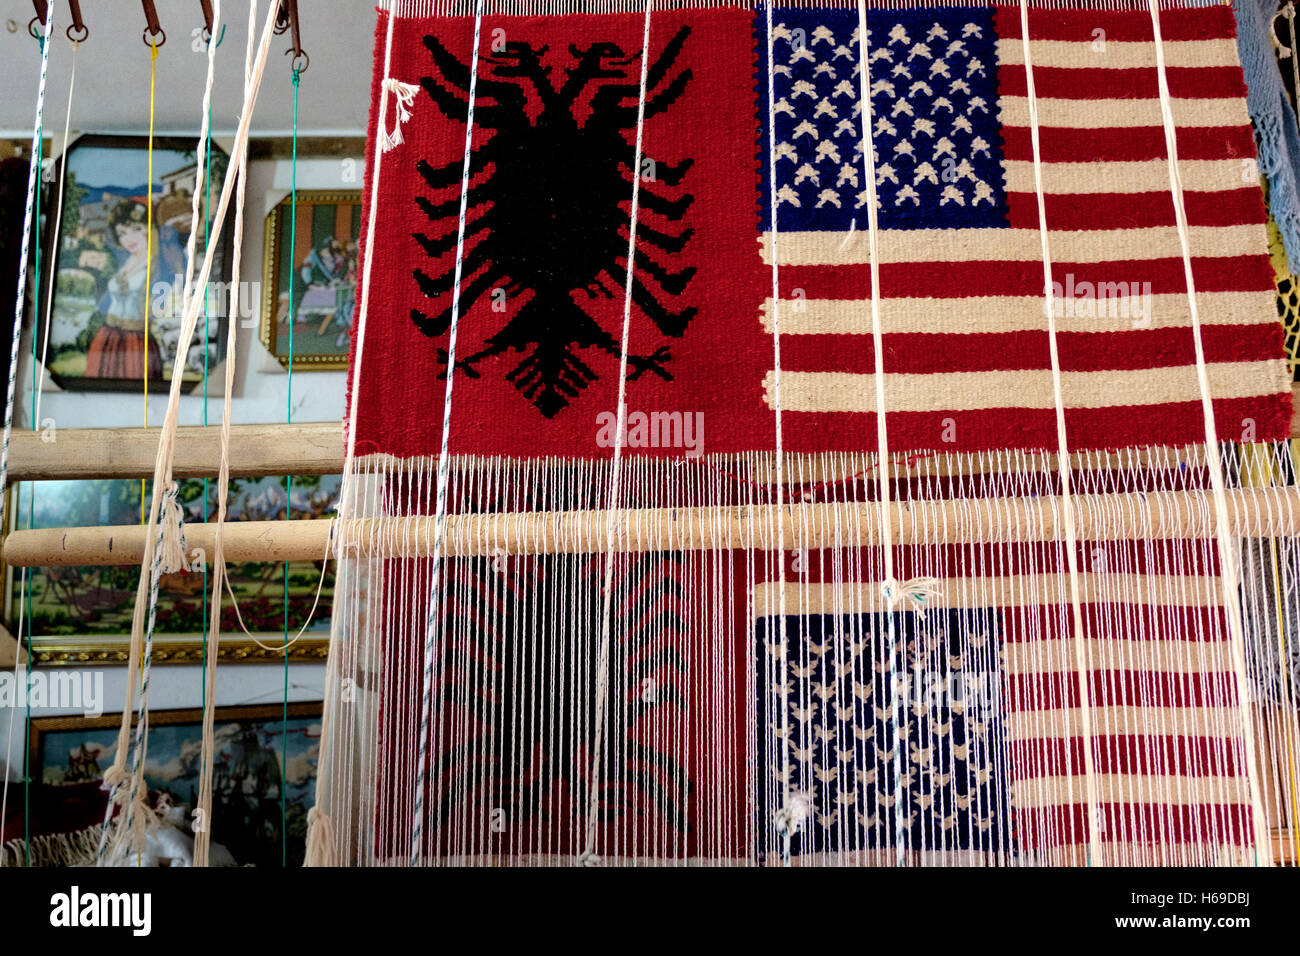 Weavings of the Albanian flag paired with the flags of other countries, such as an American flag, are popular souvenirs at the m Stock Photo